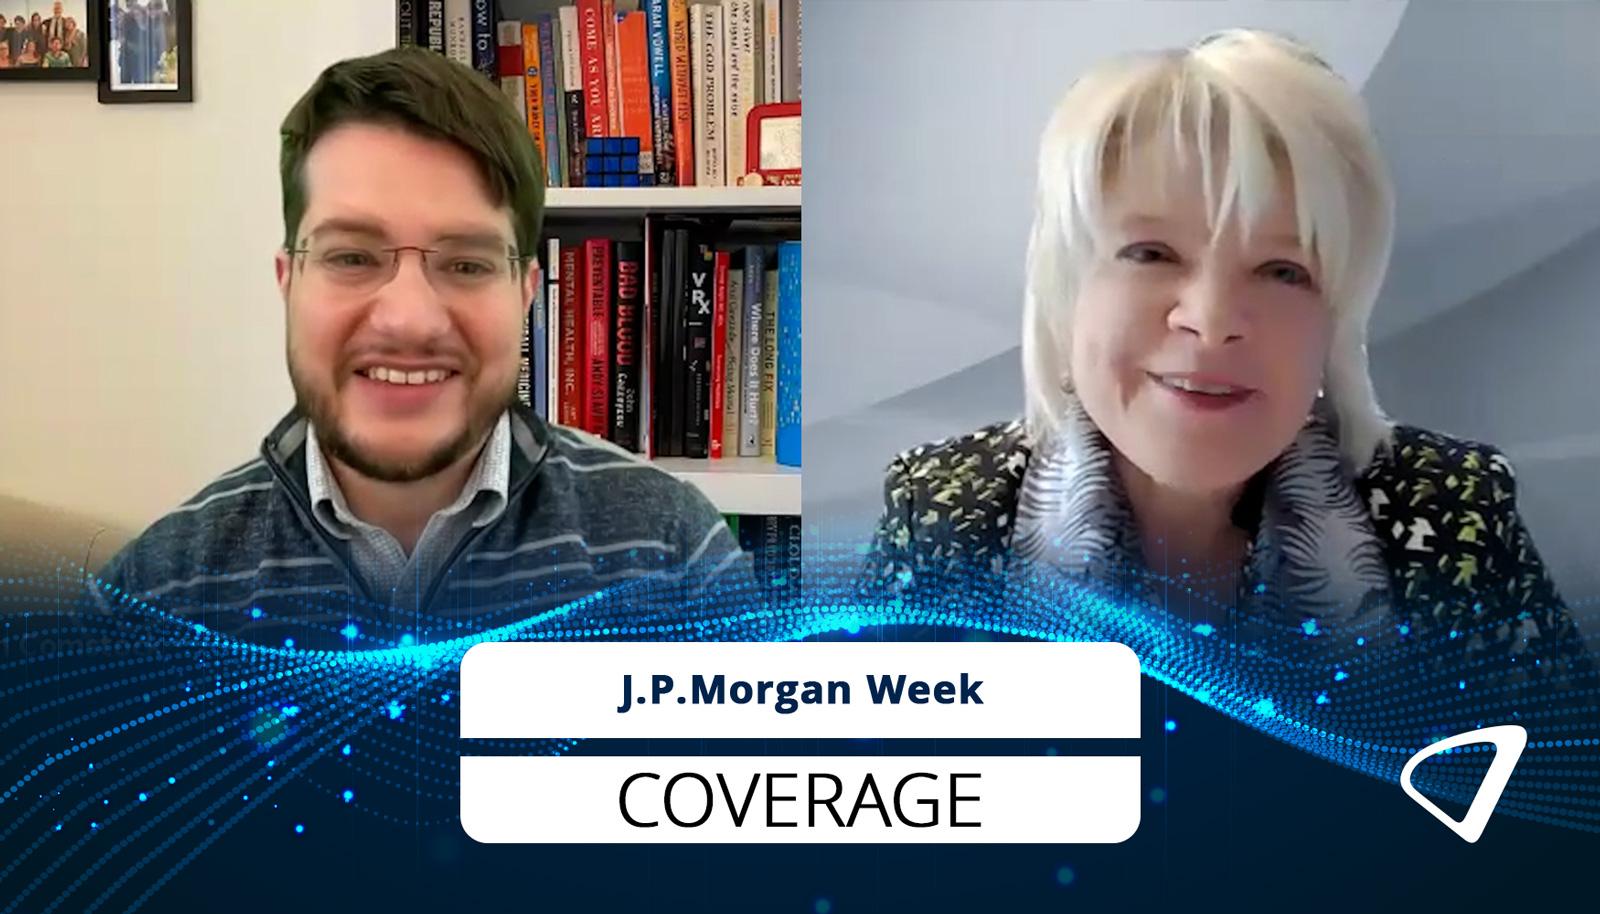 JP Morgan interview with Jonah Comstock and Marianne De Backer